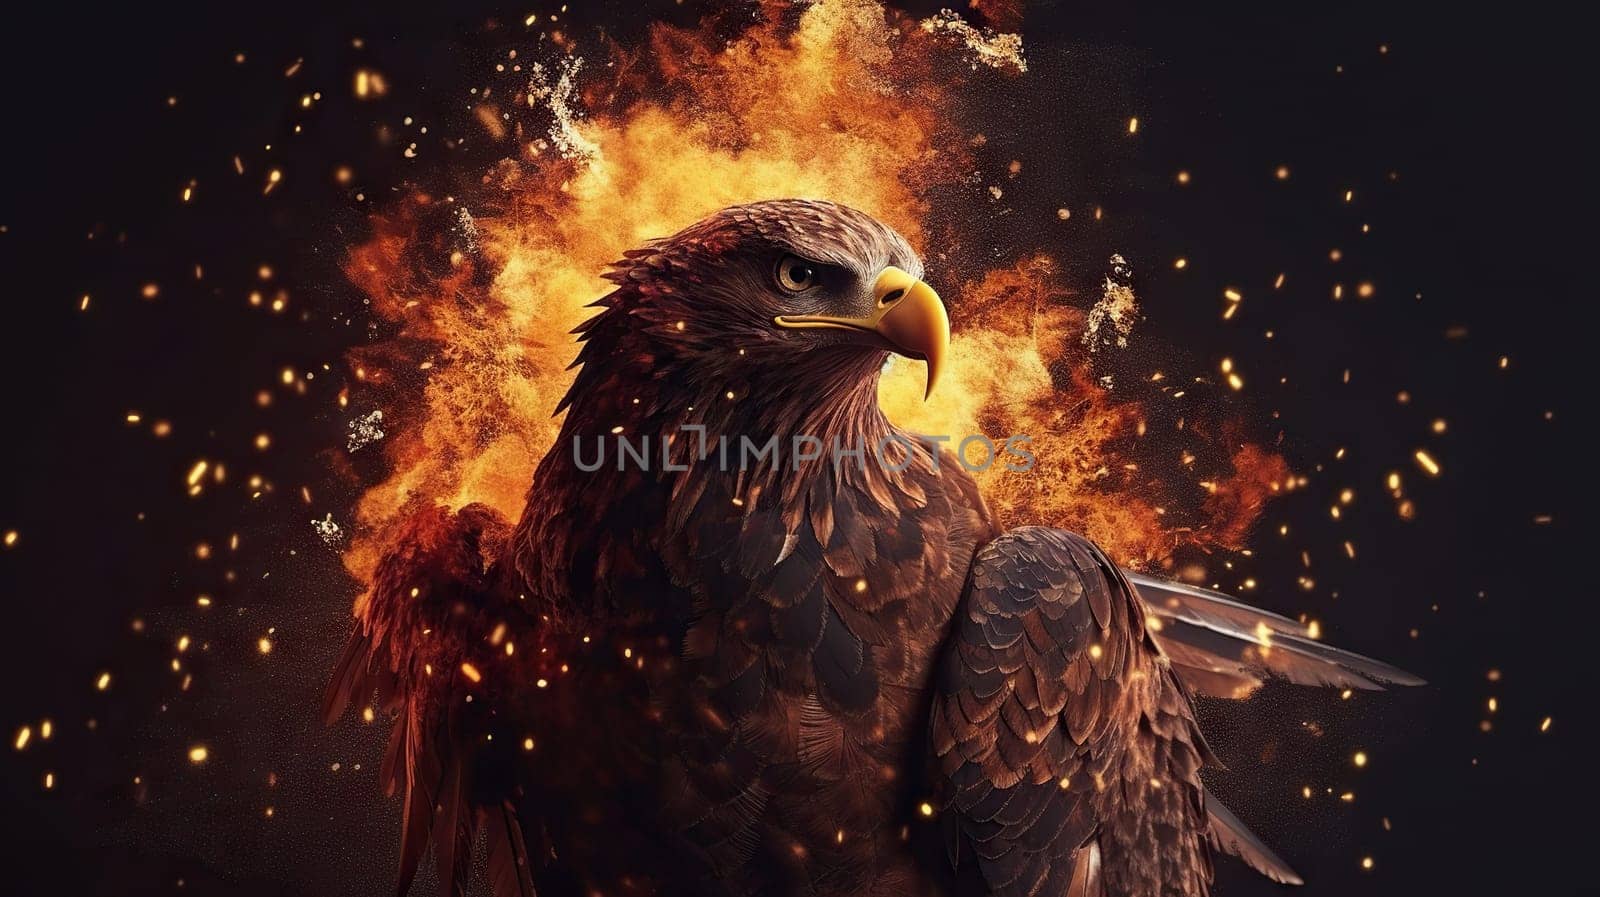 Digital artwork of an eagle with a backdrop of explosive fire and embers, symbolizing power and rebirth - Generative AI